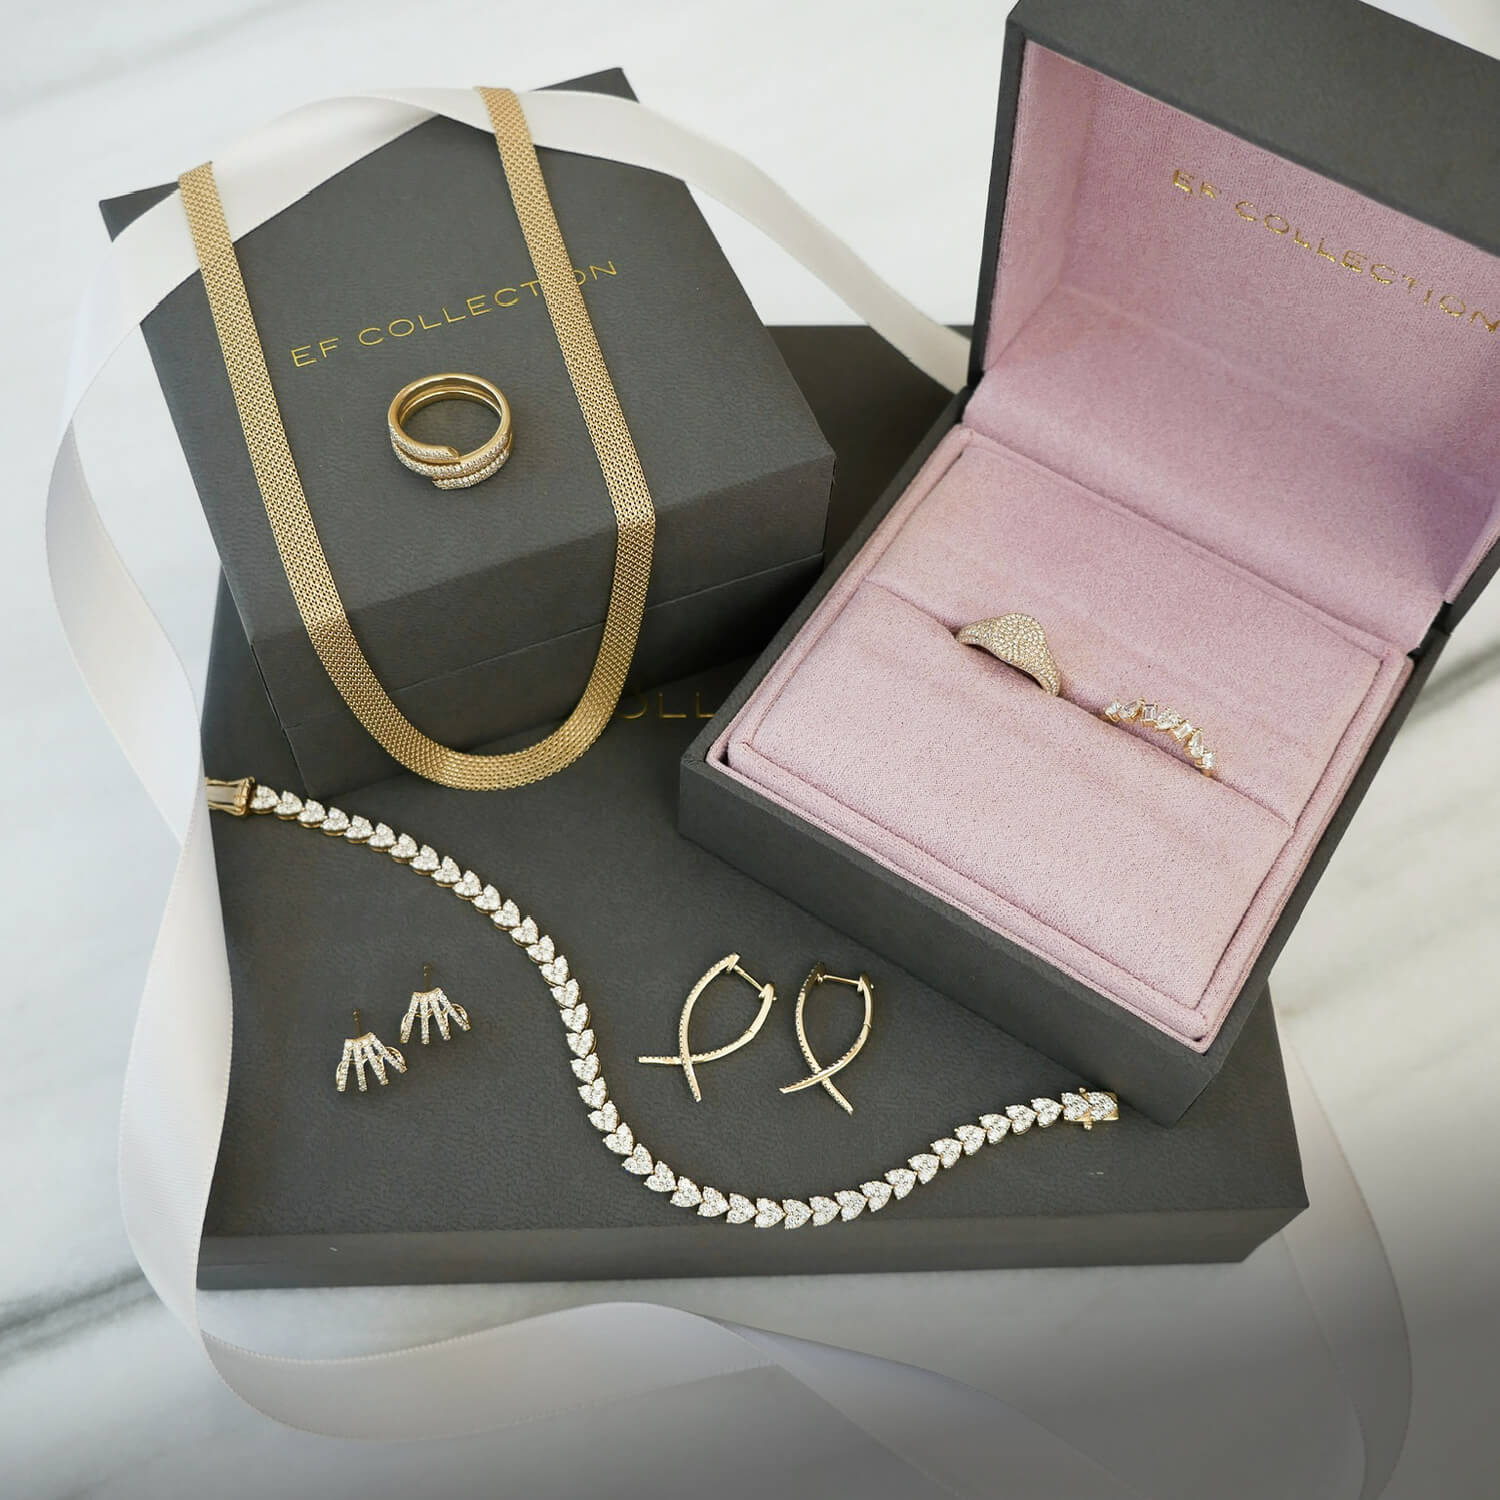 EF Collection 14k yellow gold jewelry with pink and grey jewelry boxes